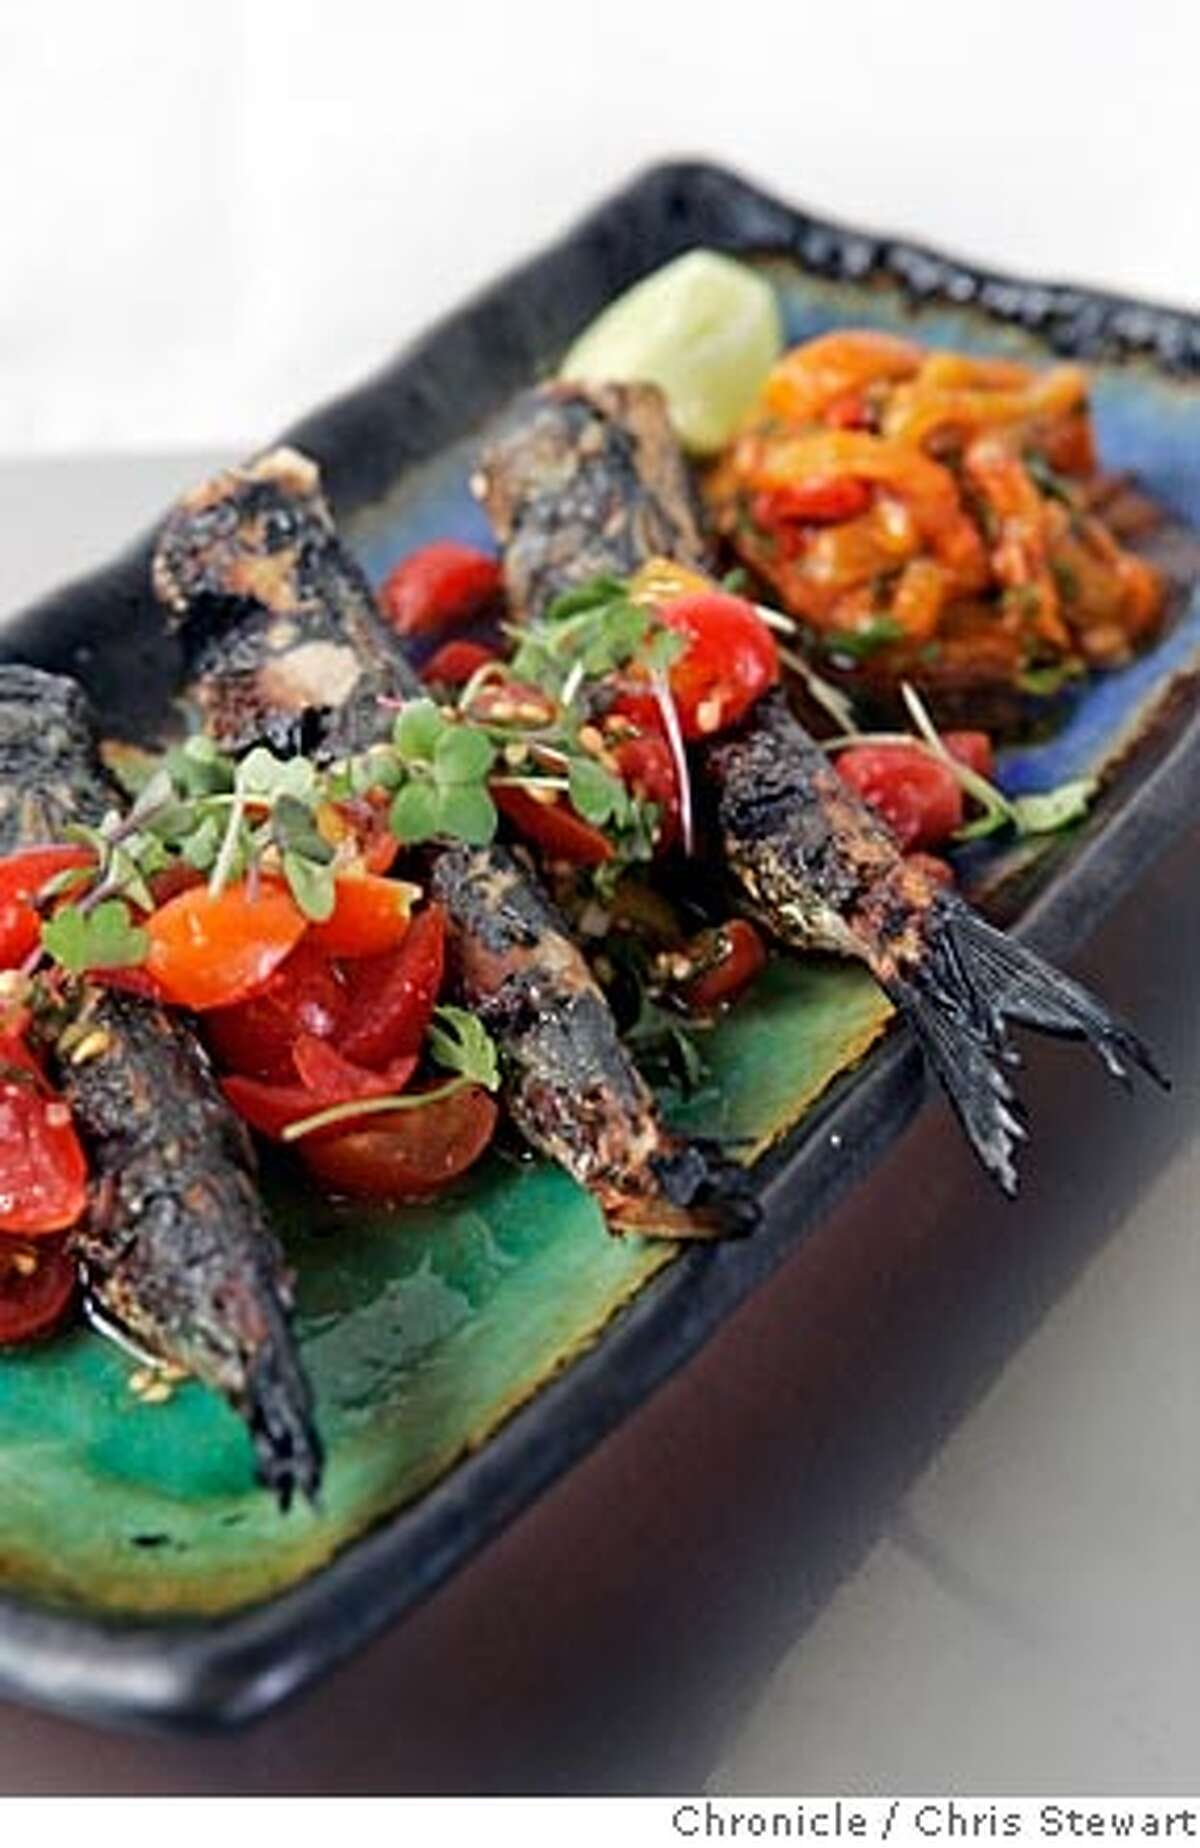 Event on 7/21/05 in Berkeley. A new restaurant in Berkeley called Sea Salt is featuring dishes such as the grilled local sardines with marinated roasted peppers and tomato-mint vinaigrette. The restaurant is located at 2512 San Pablo Avenue. Chris Stewart / The Chronicle